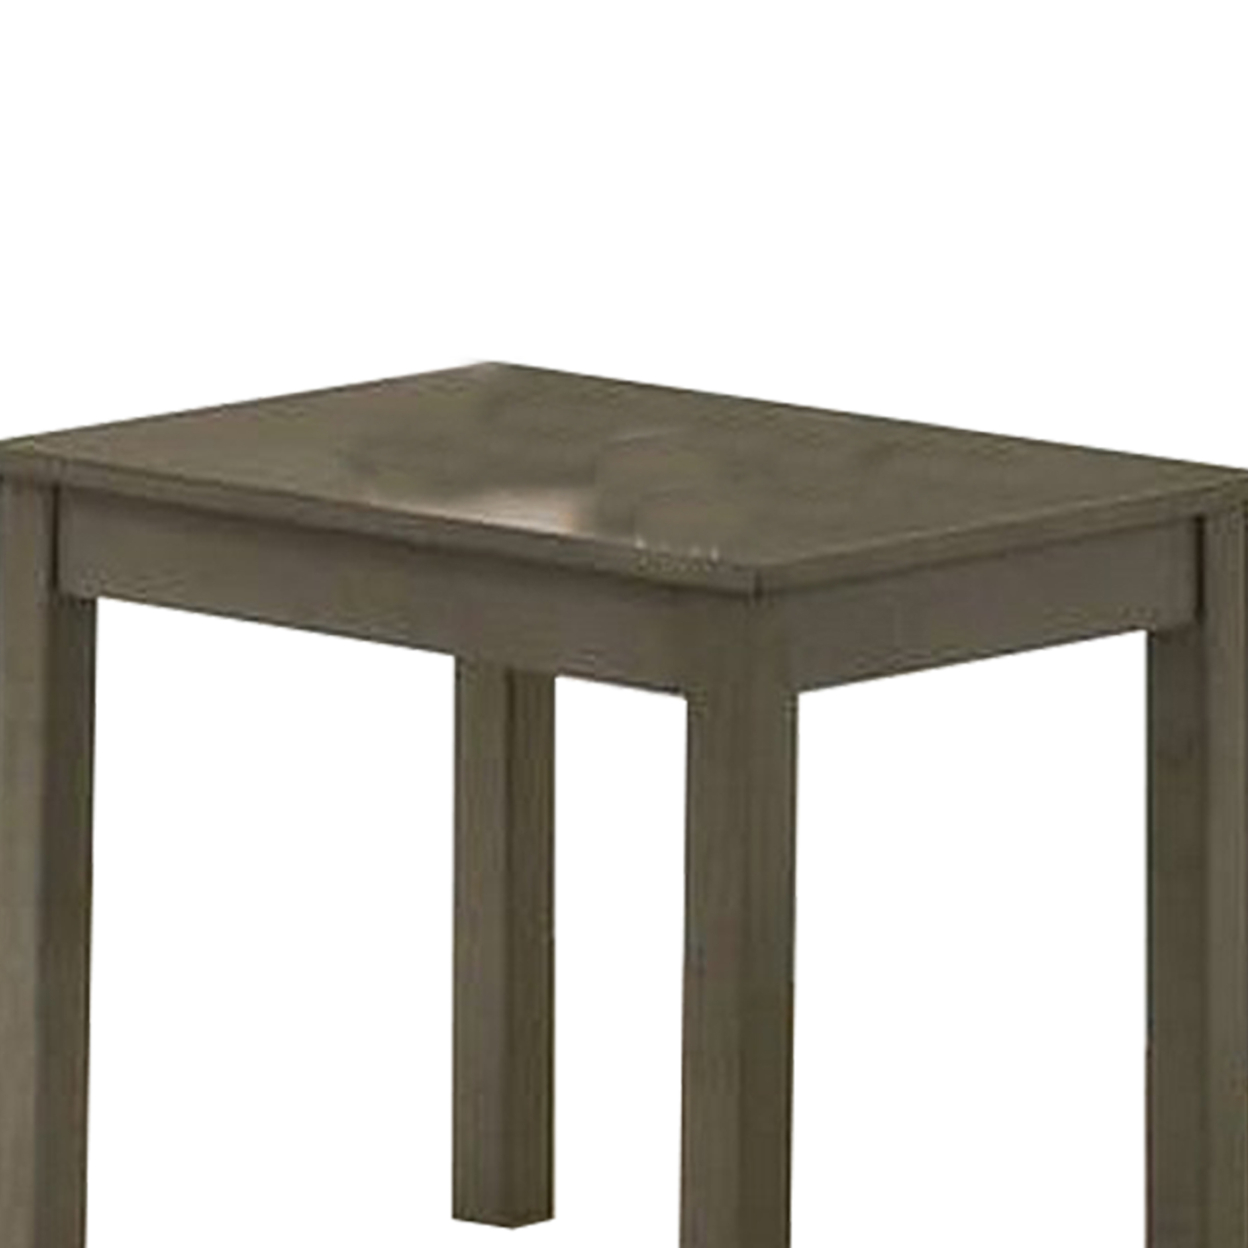 3 Piece Transitional Coffee Table And End Table With Block Legs, Gray- Saltoro Sherpi